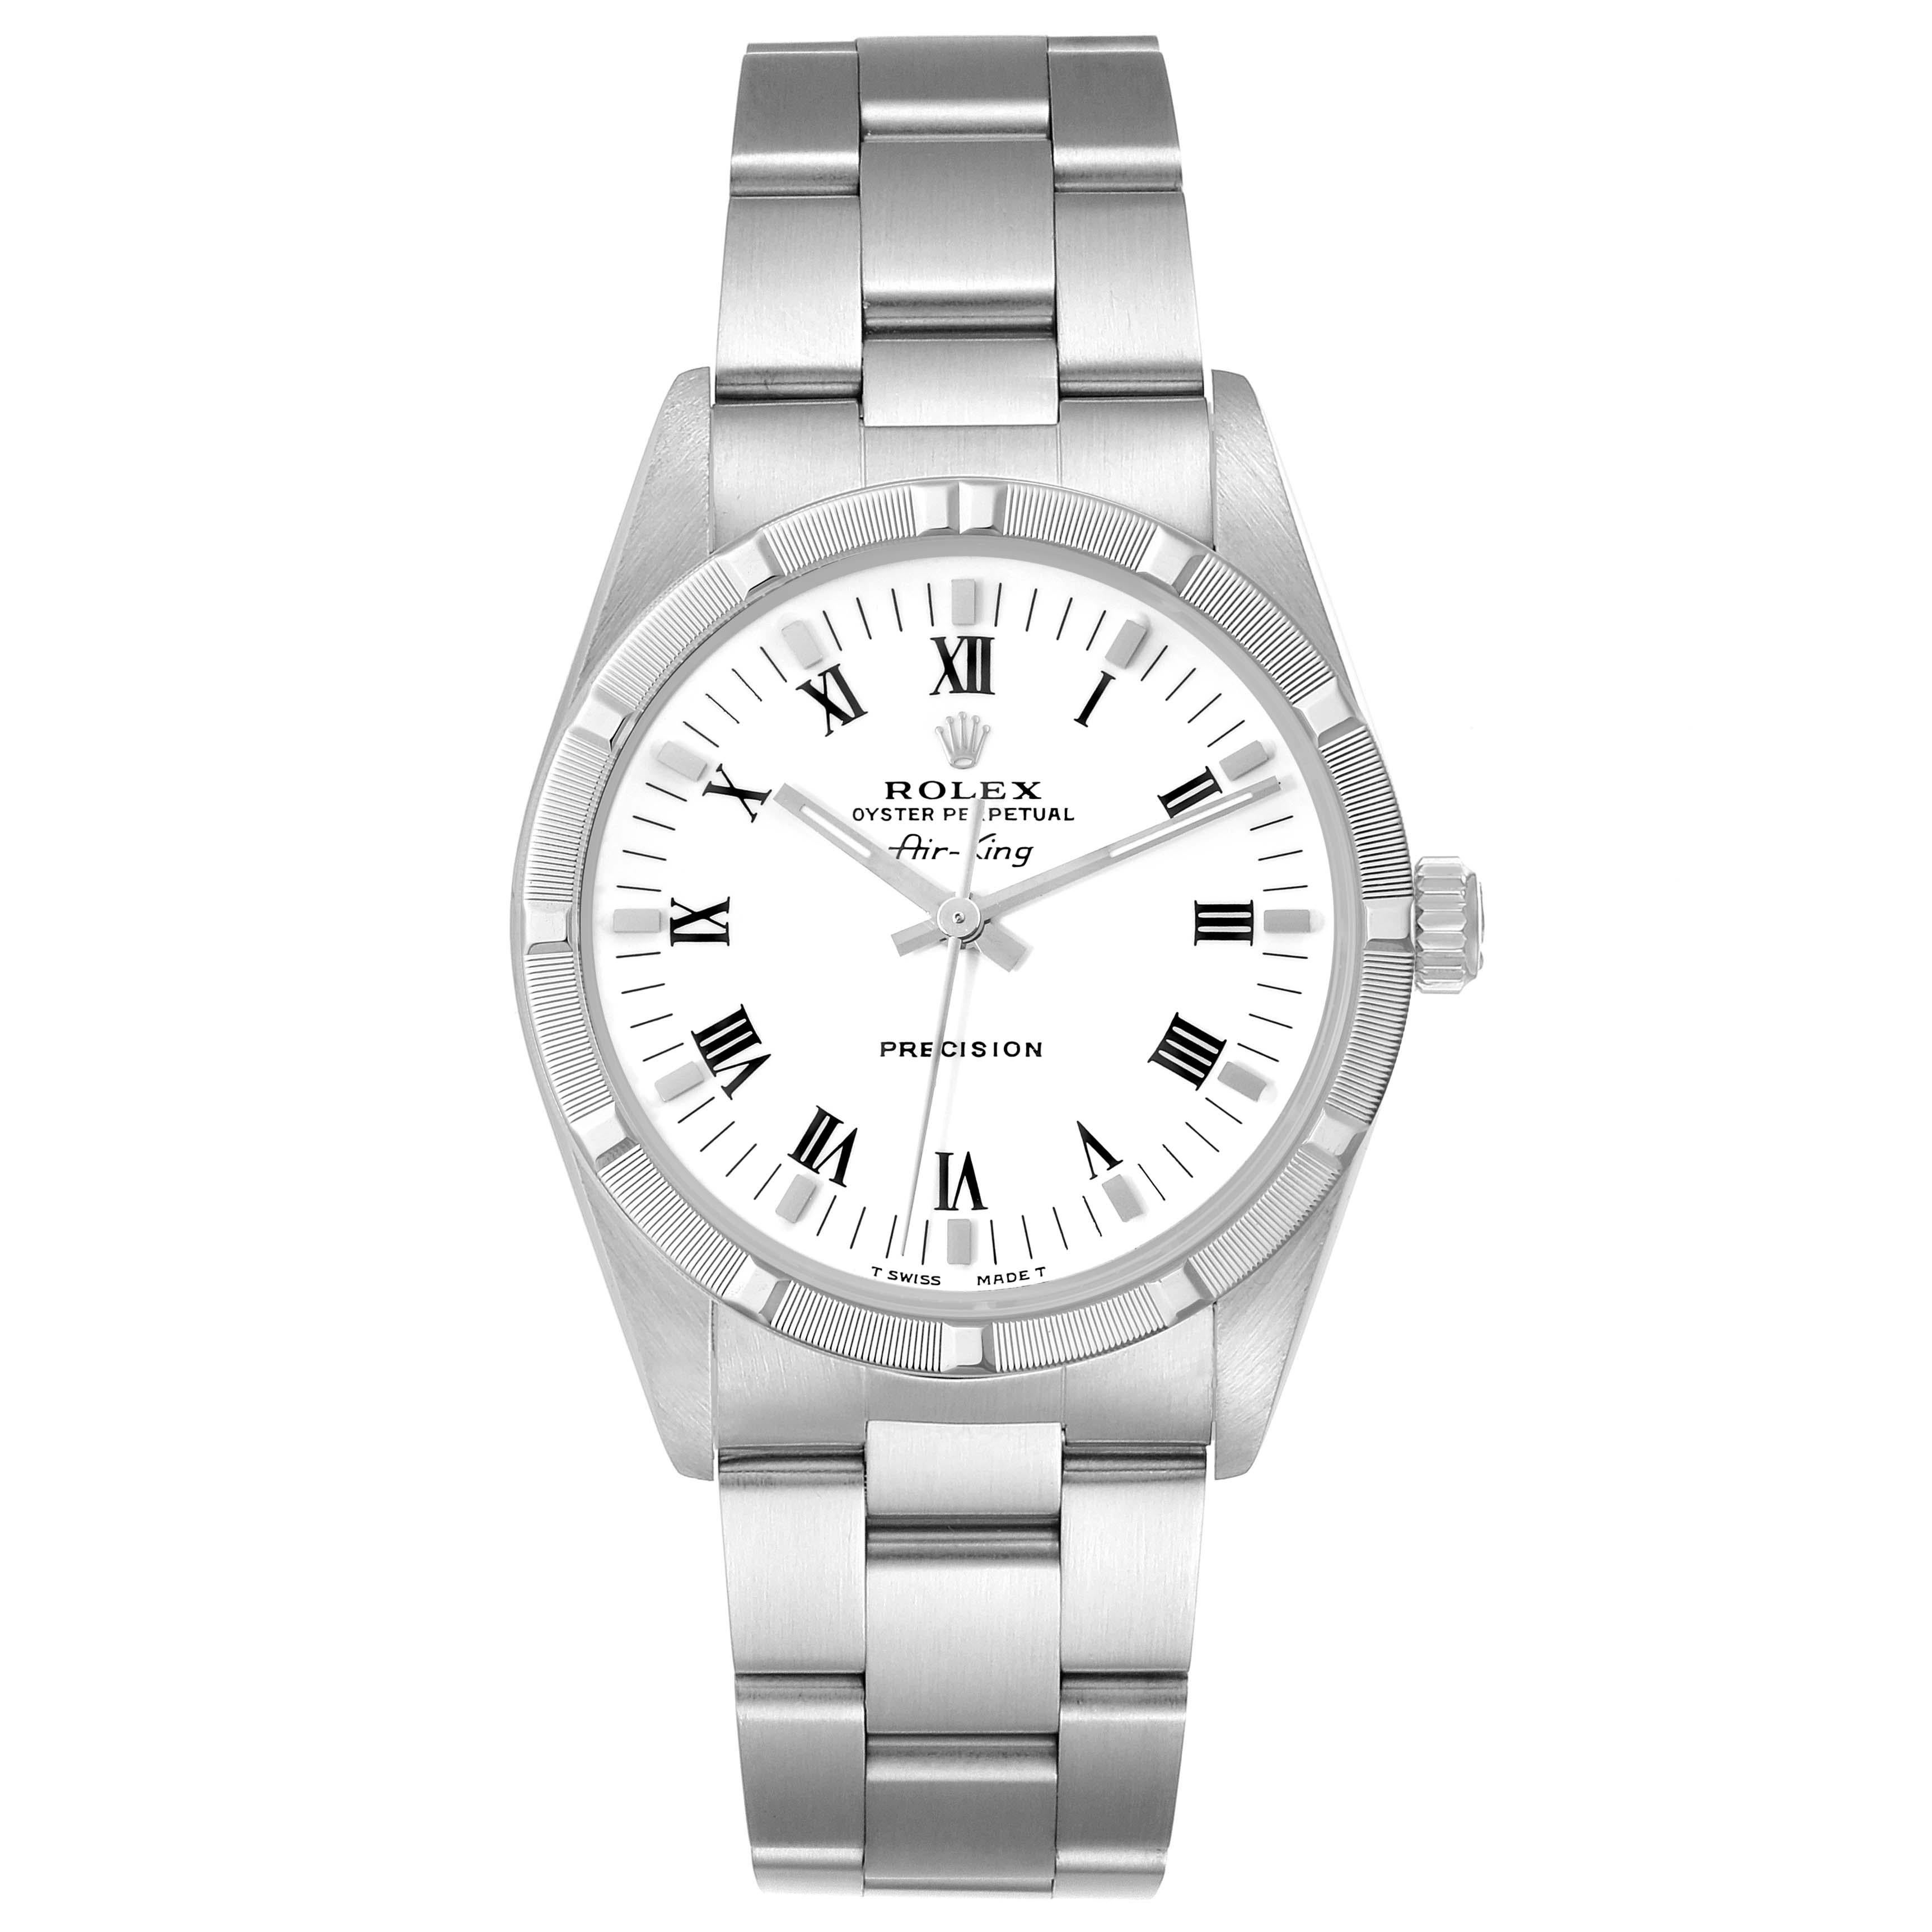 Rolex Air King 34mm White Roman Dial Steel Mens Watch 14010. Automatic self-winding movement. Stainless steel case 34.0 mm in diameter. Rolex logo on a crown. Stainless steel engine turned bezel. Scratch resistant sapphire crystal. White dial with